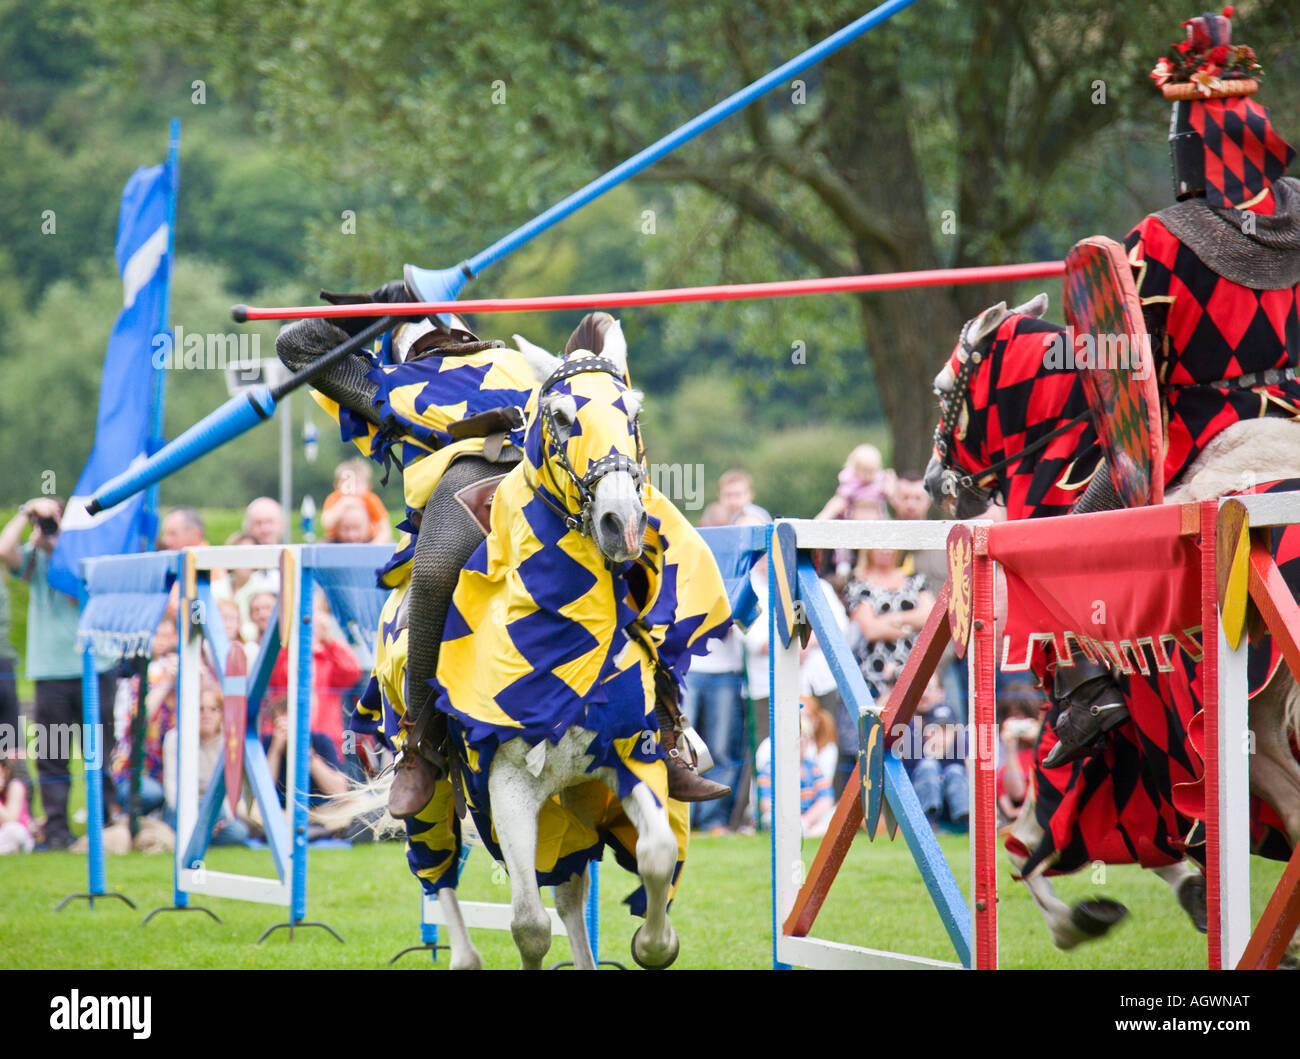 Medieval knight knocked off horse during jousting tournament Stock Photo